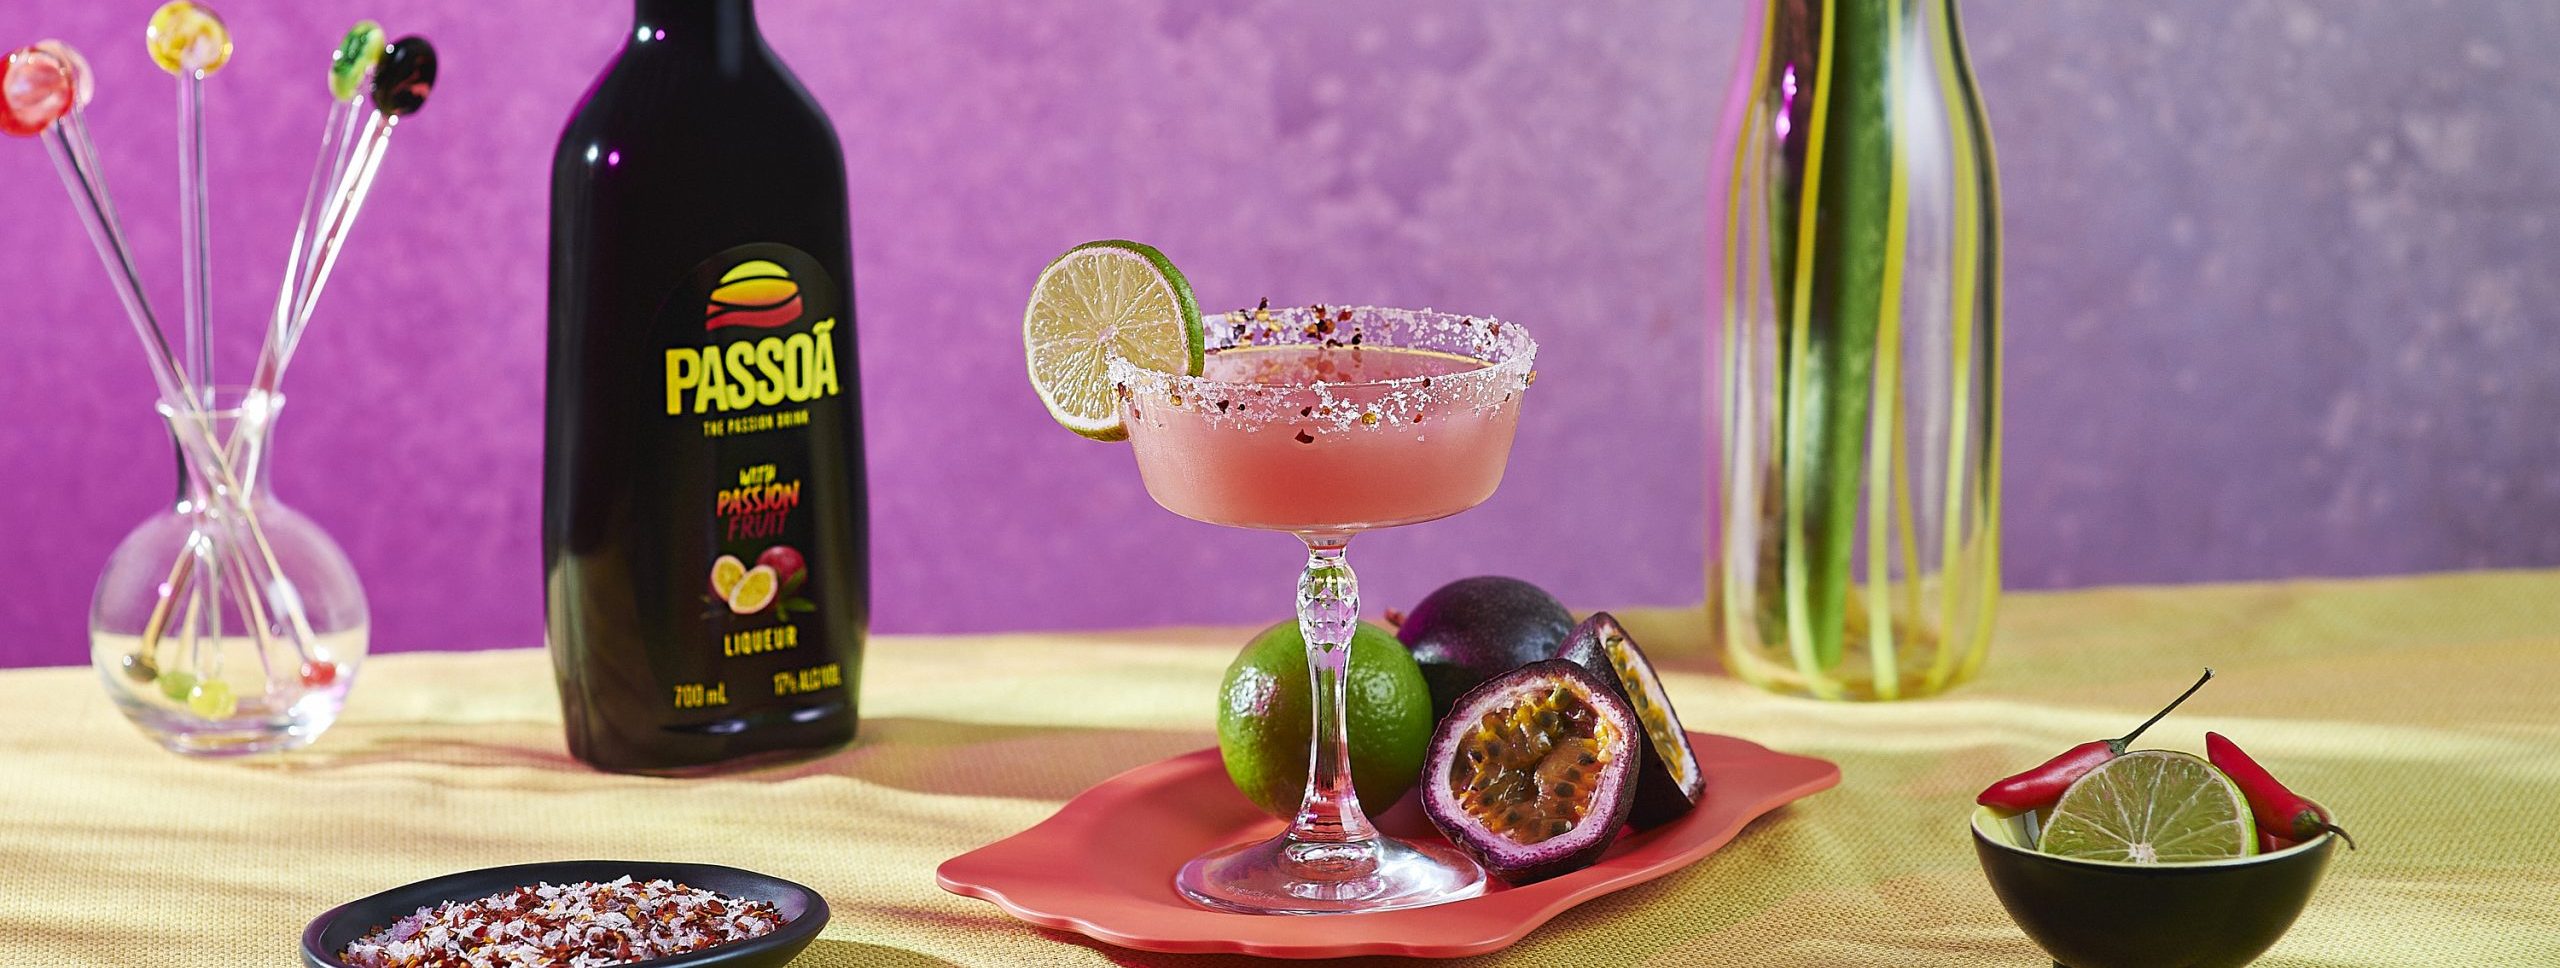 Passoã Spicy Margarita in coupe glass with lime garnish and Passoã bottle on pink background with passionfruits